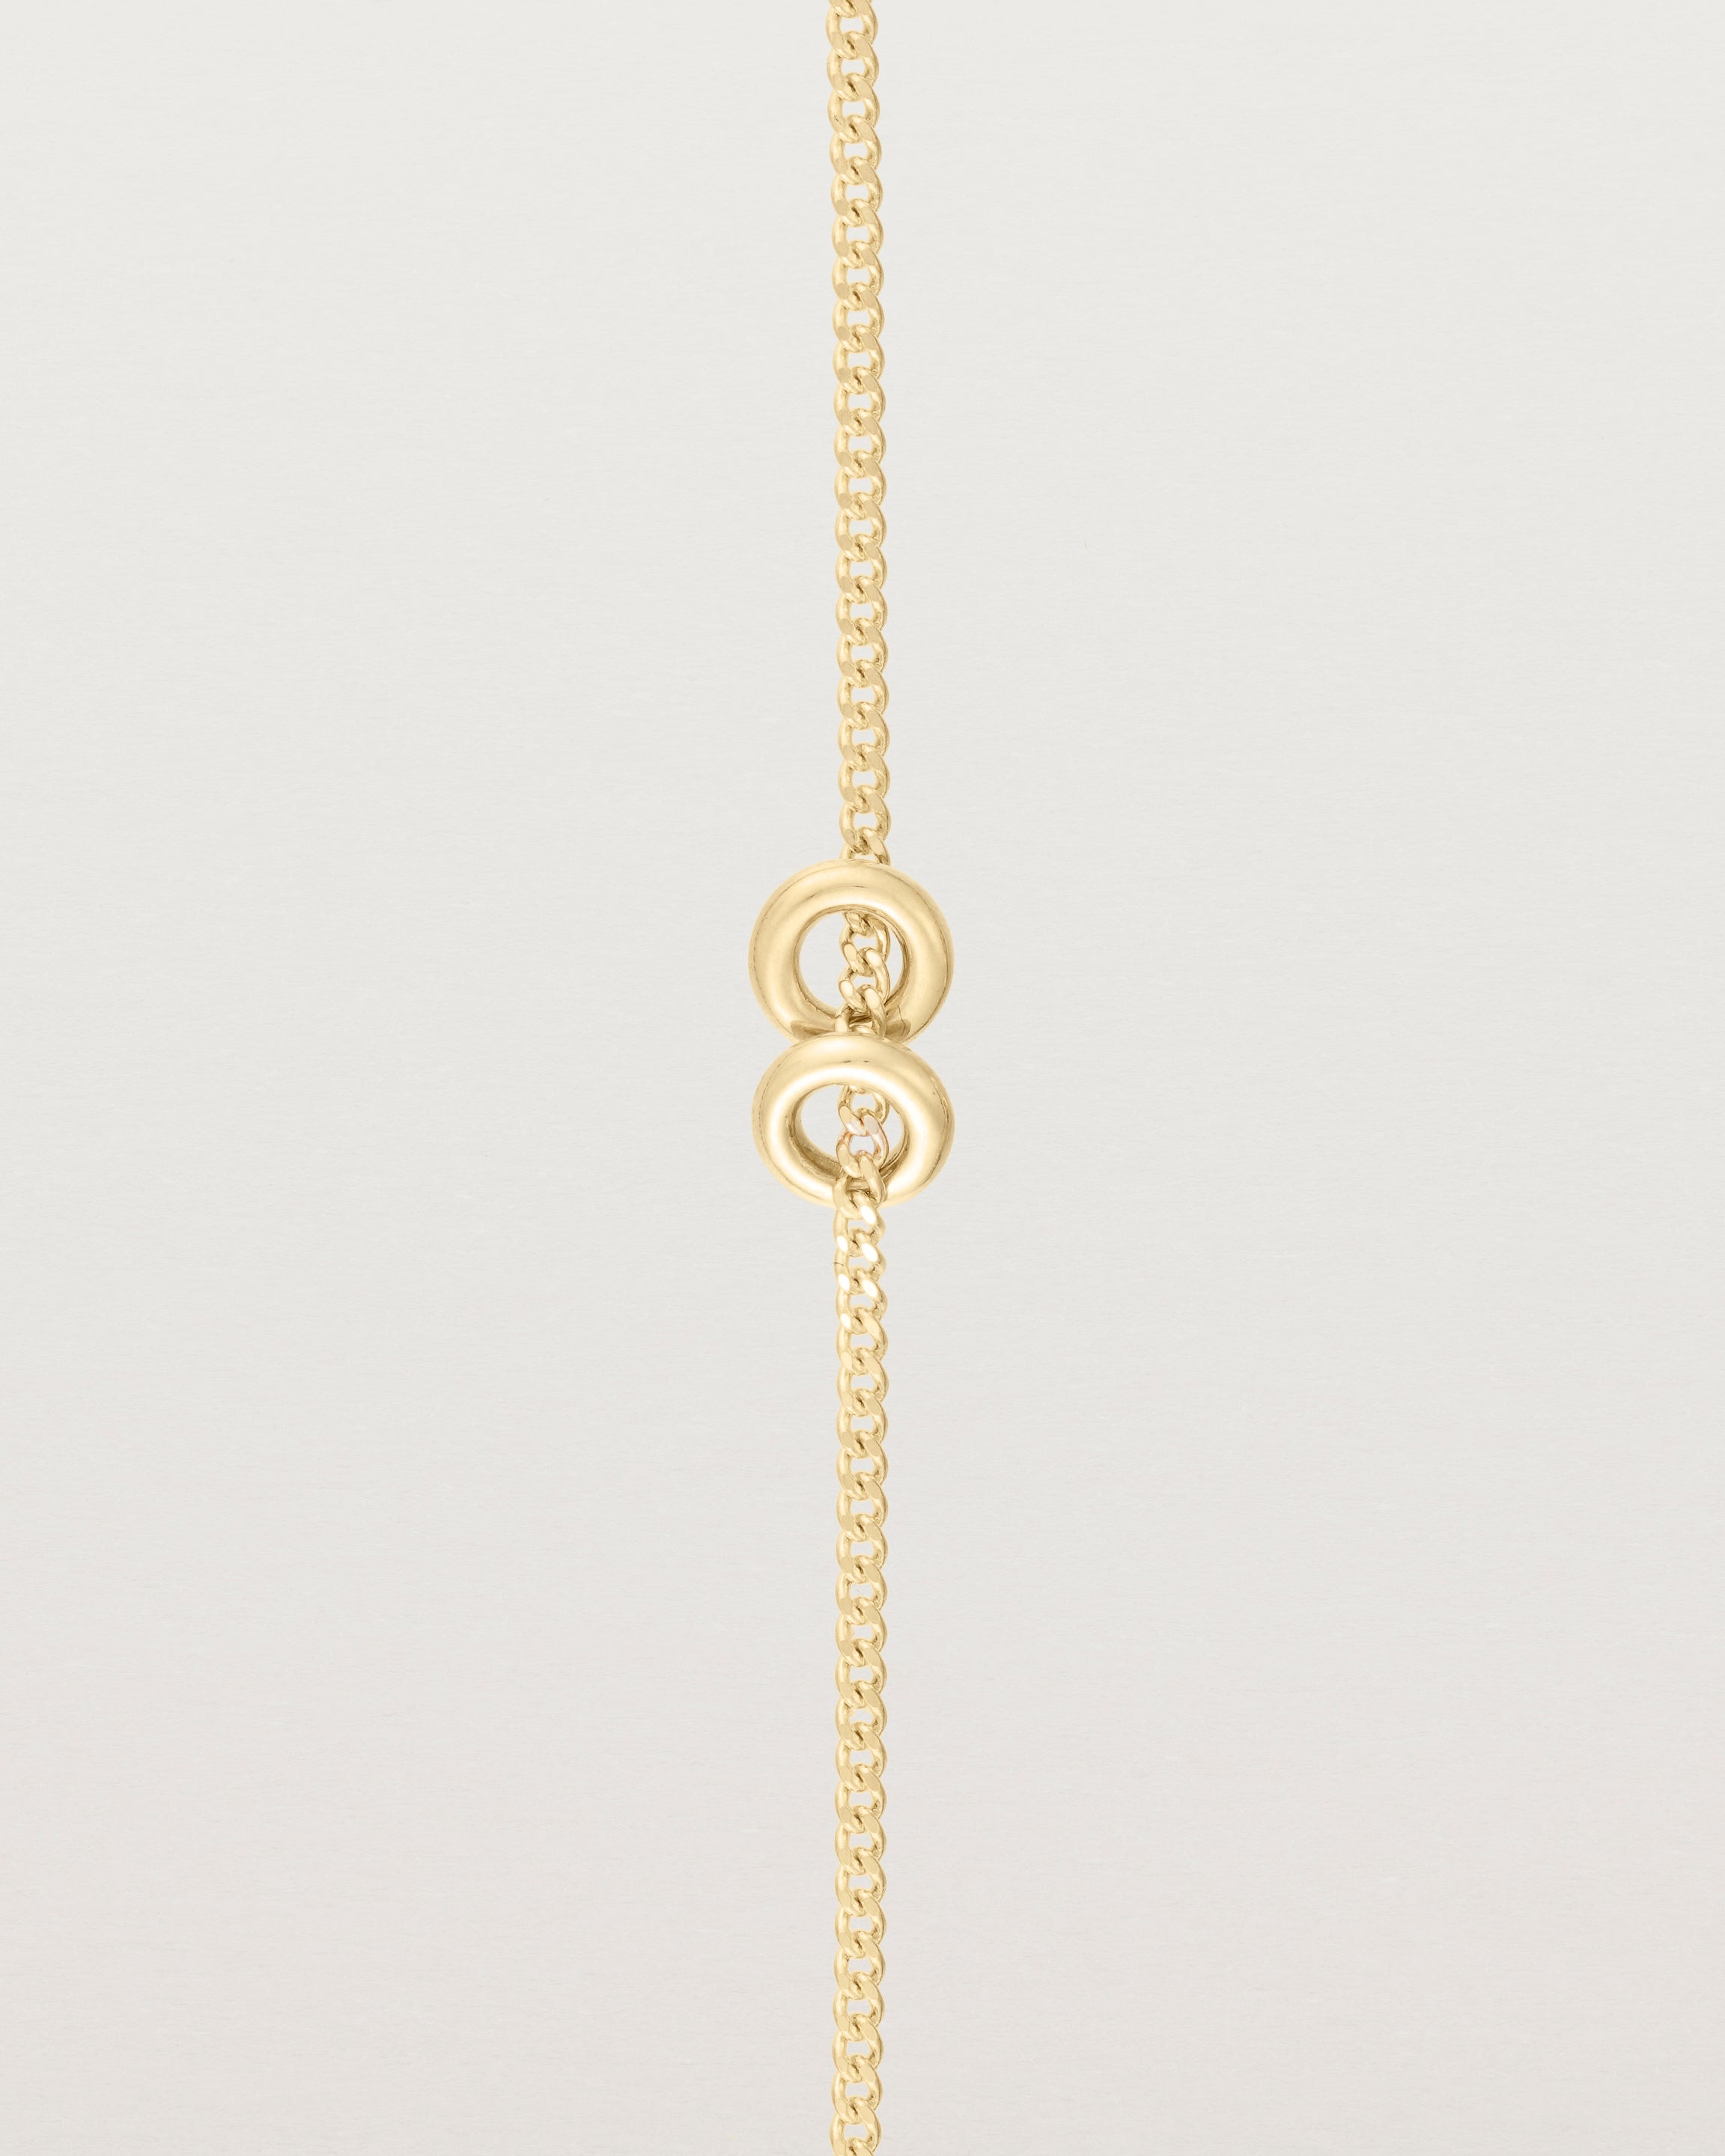 close up view of Aether bracelet featuring two round charms in yellow gold